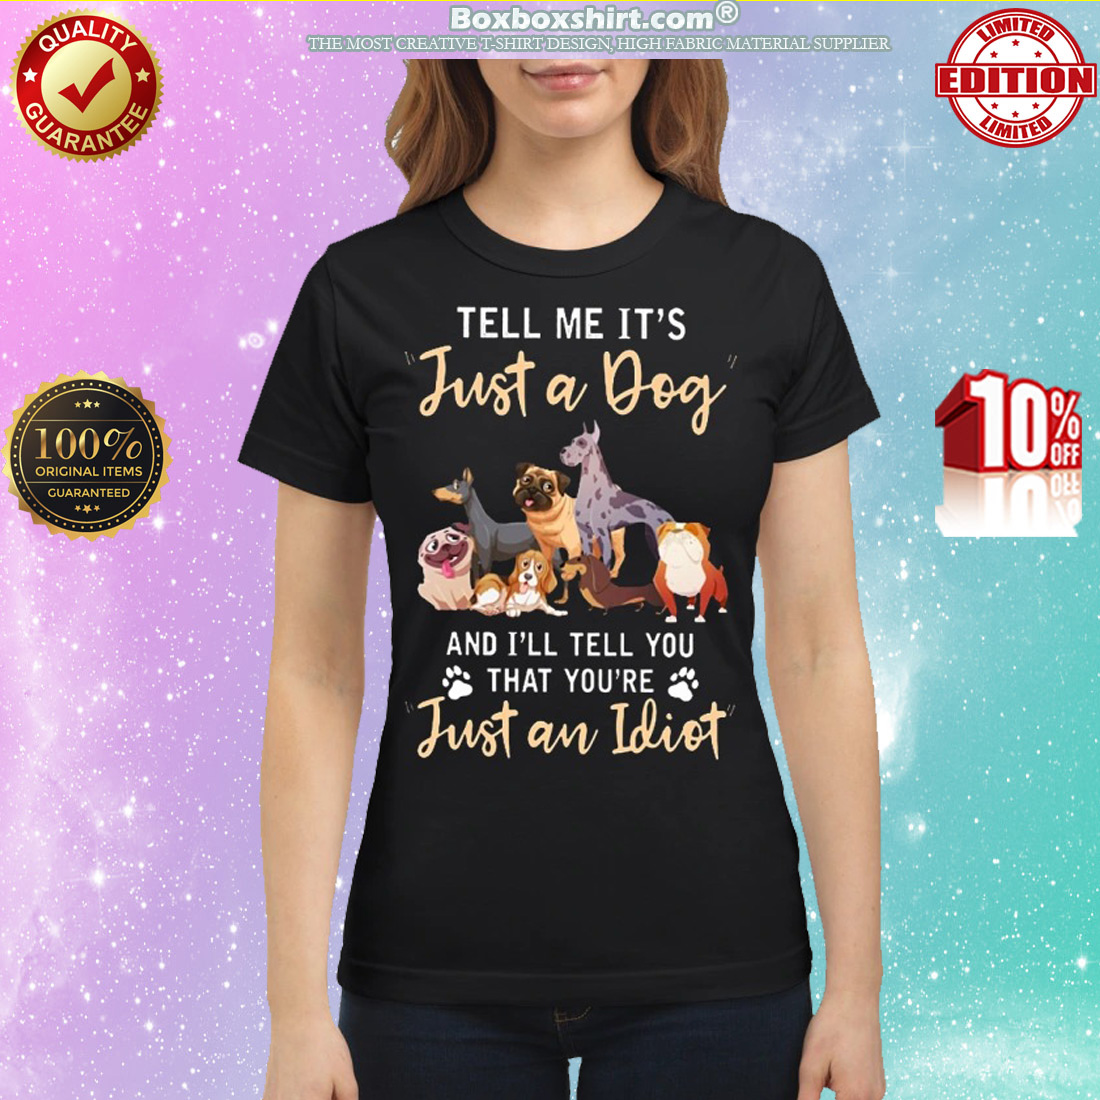 Tell me It's just a dog and I will tell you that you're just an idiot classic shirt